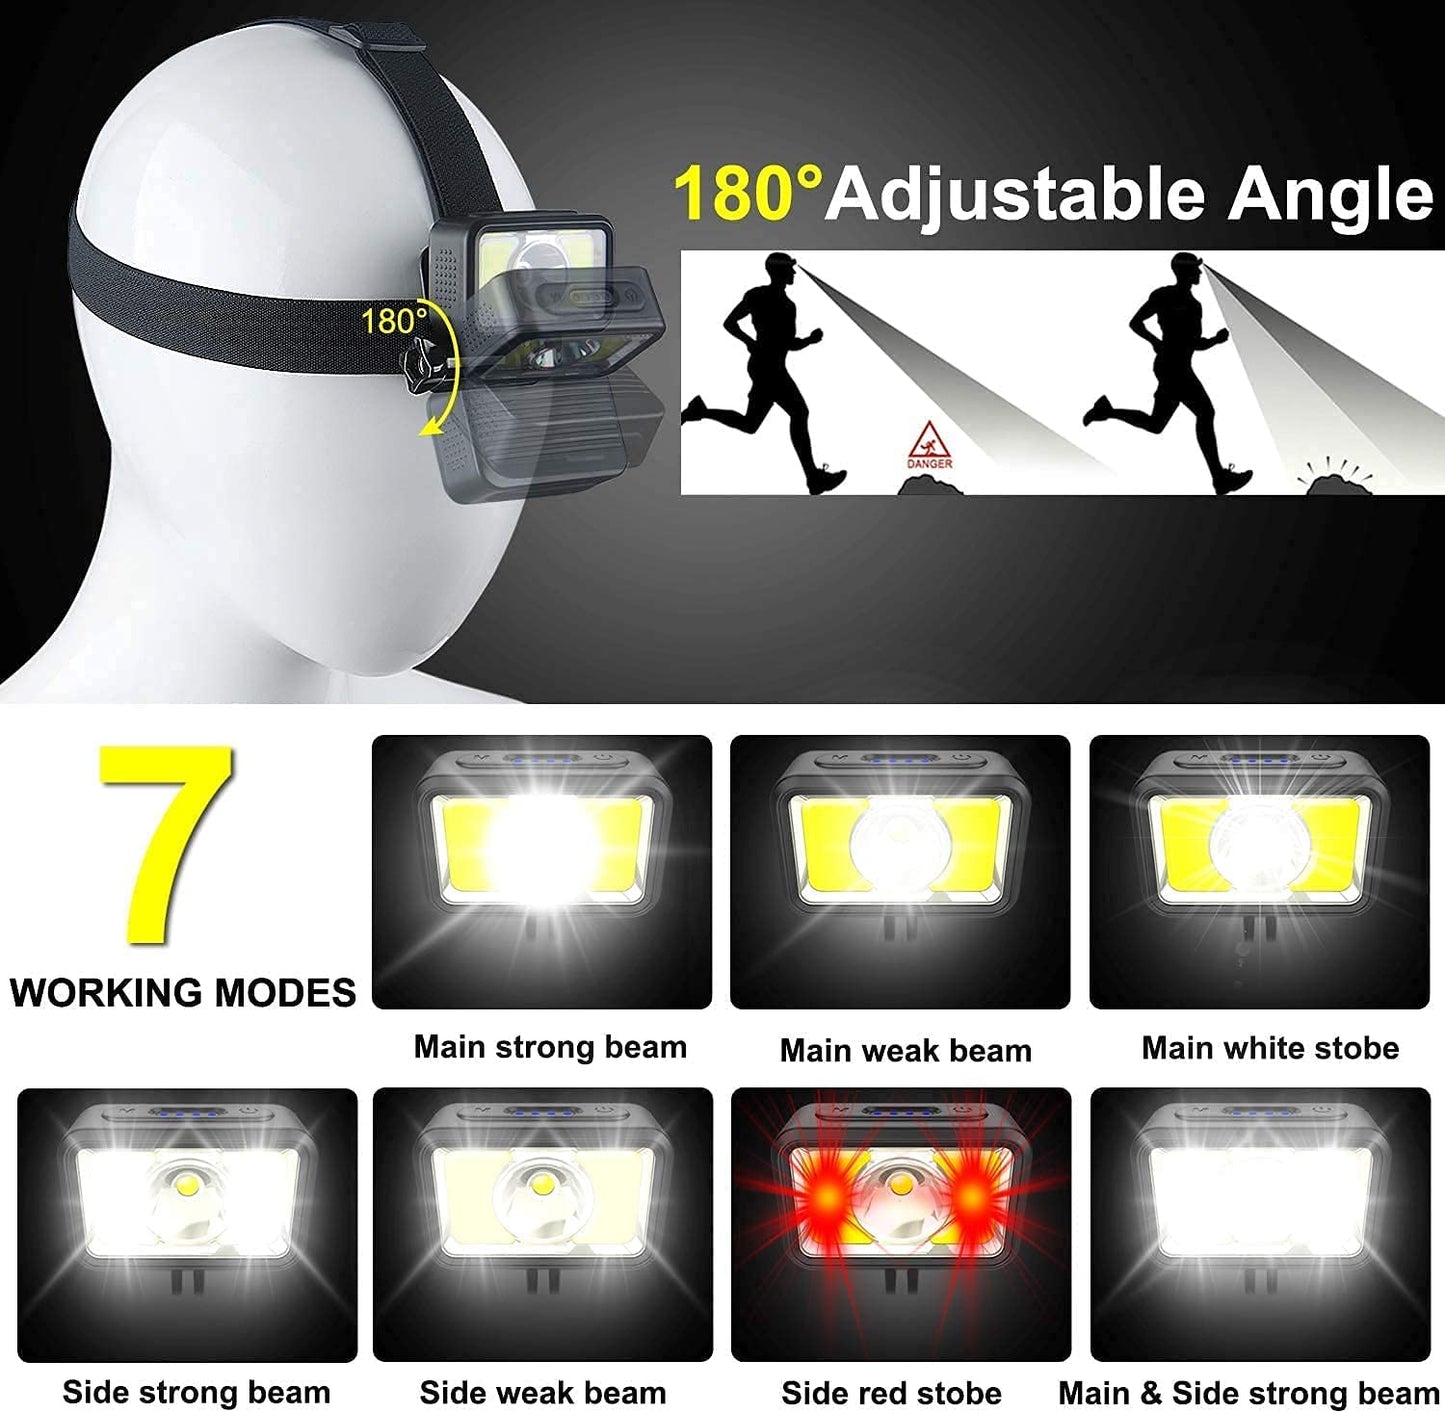 J - Headlight LED 2-Way 7 Modes 1000 Lumens Super Bright USB Rechargeable Headlight LED Waterproof for Camping Fishing Jogging and Reading